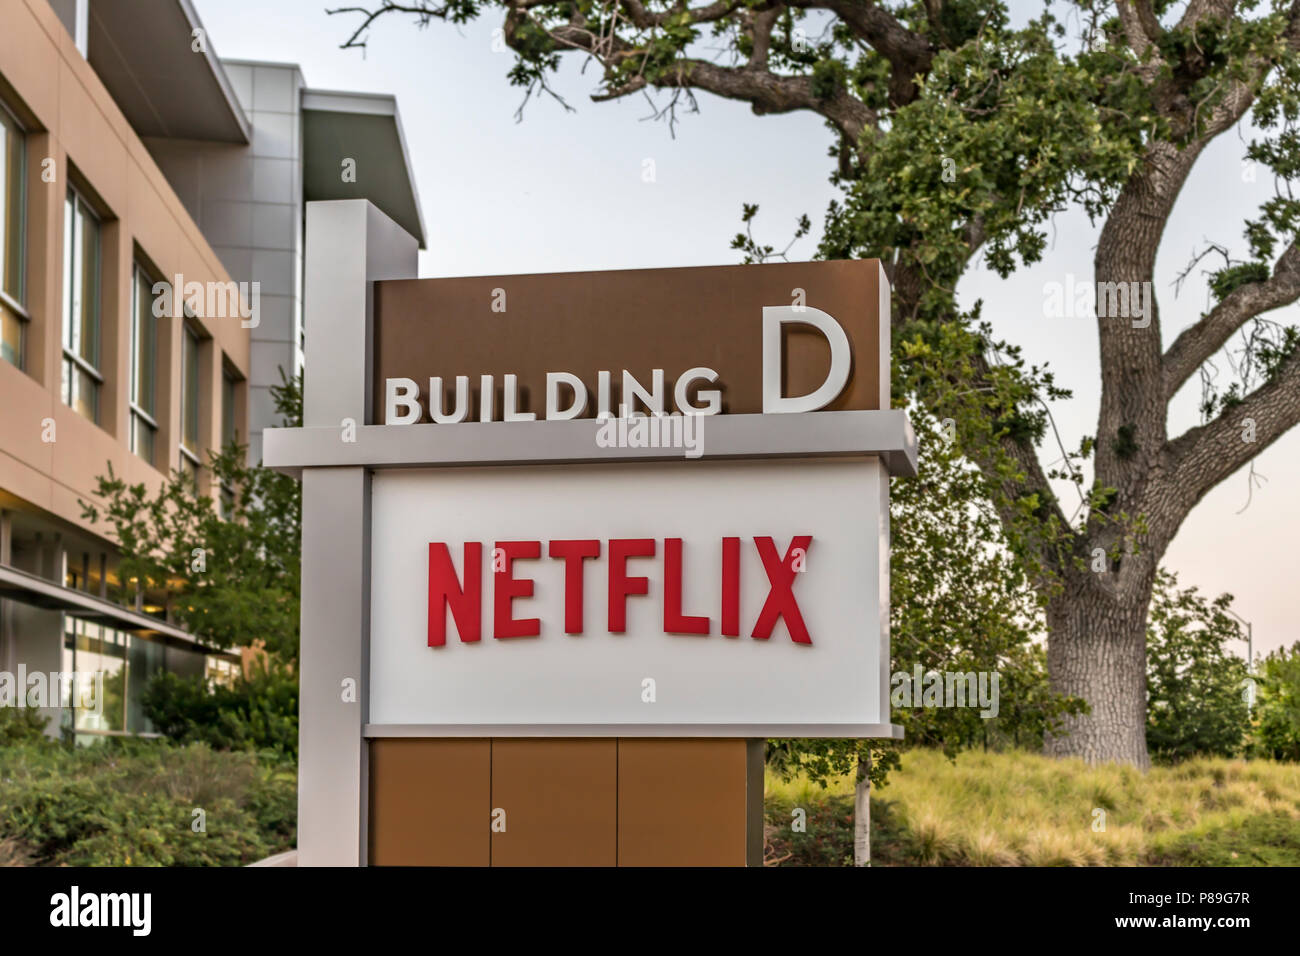 Town of Los Gatos, California, USA - June 28, 2018: Netflix Building D, on their new campus in the beautiful Town of Los Gatos, CA. Stock Photo